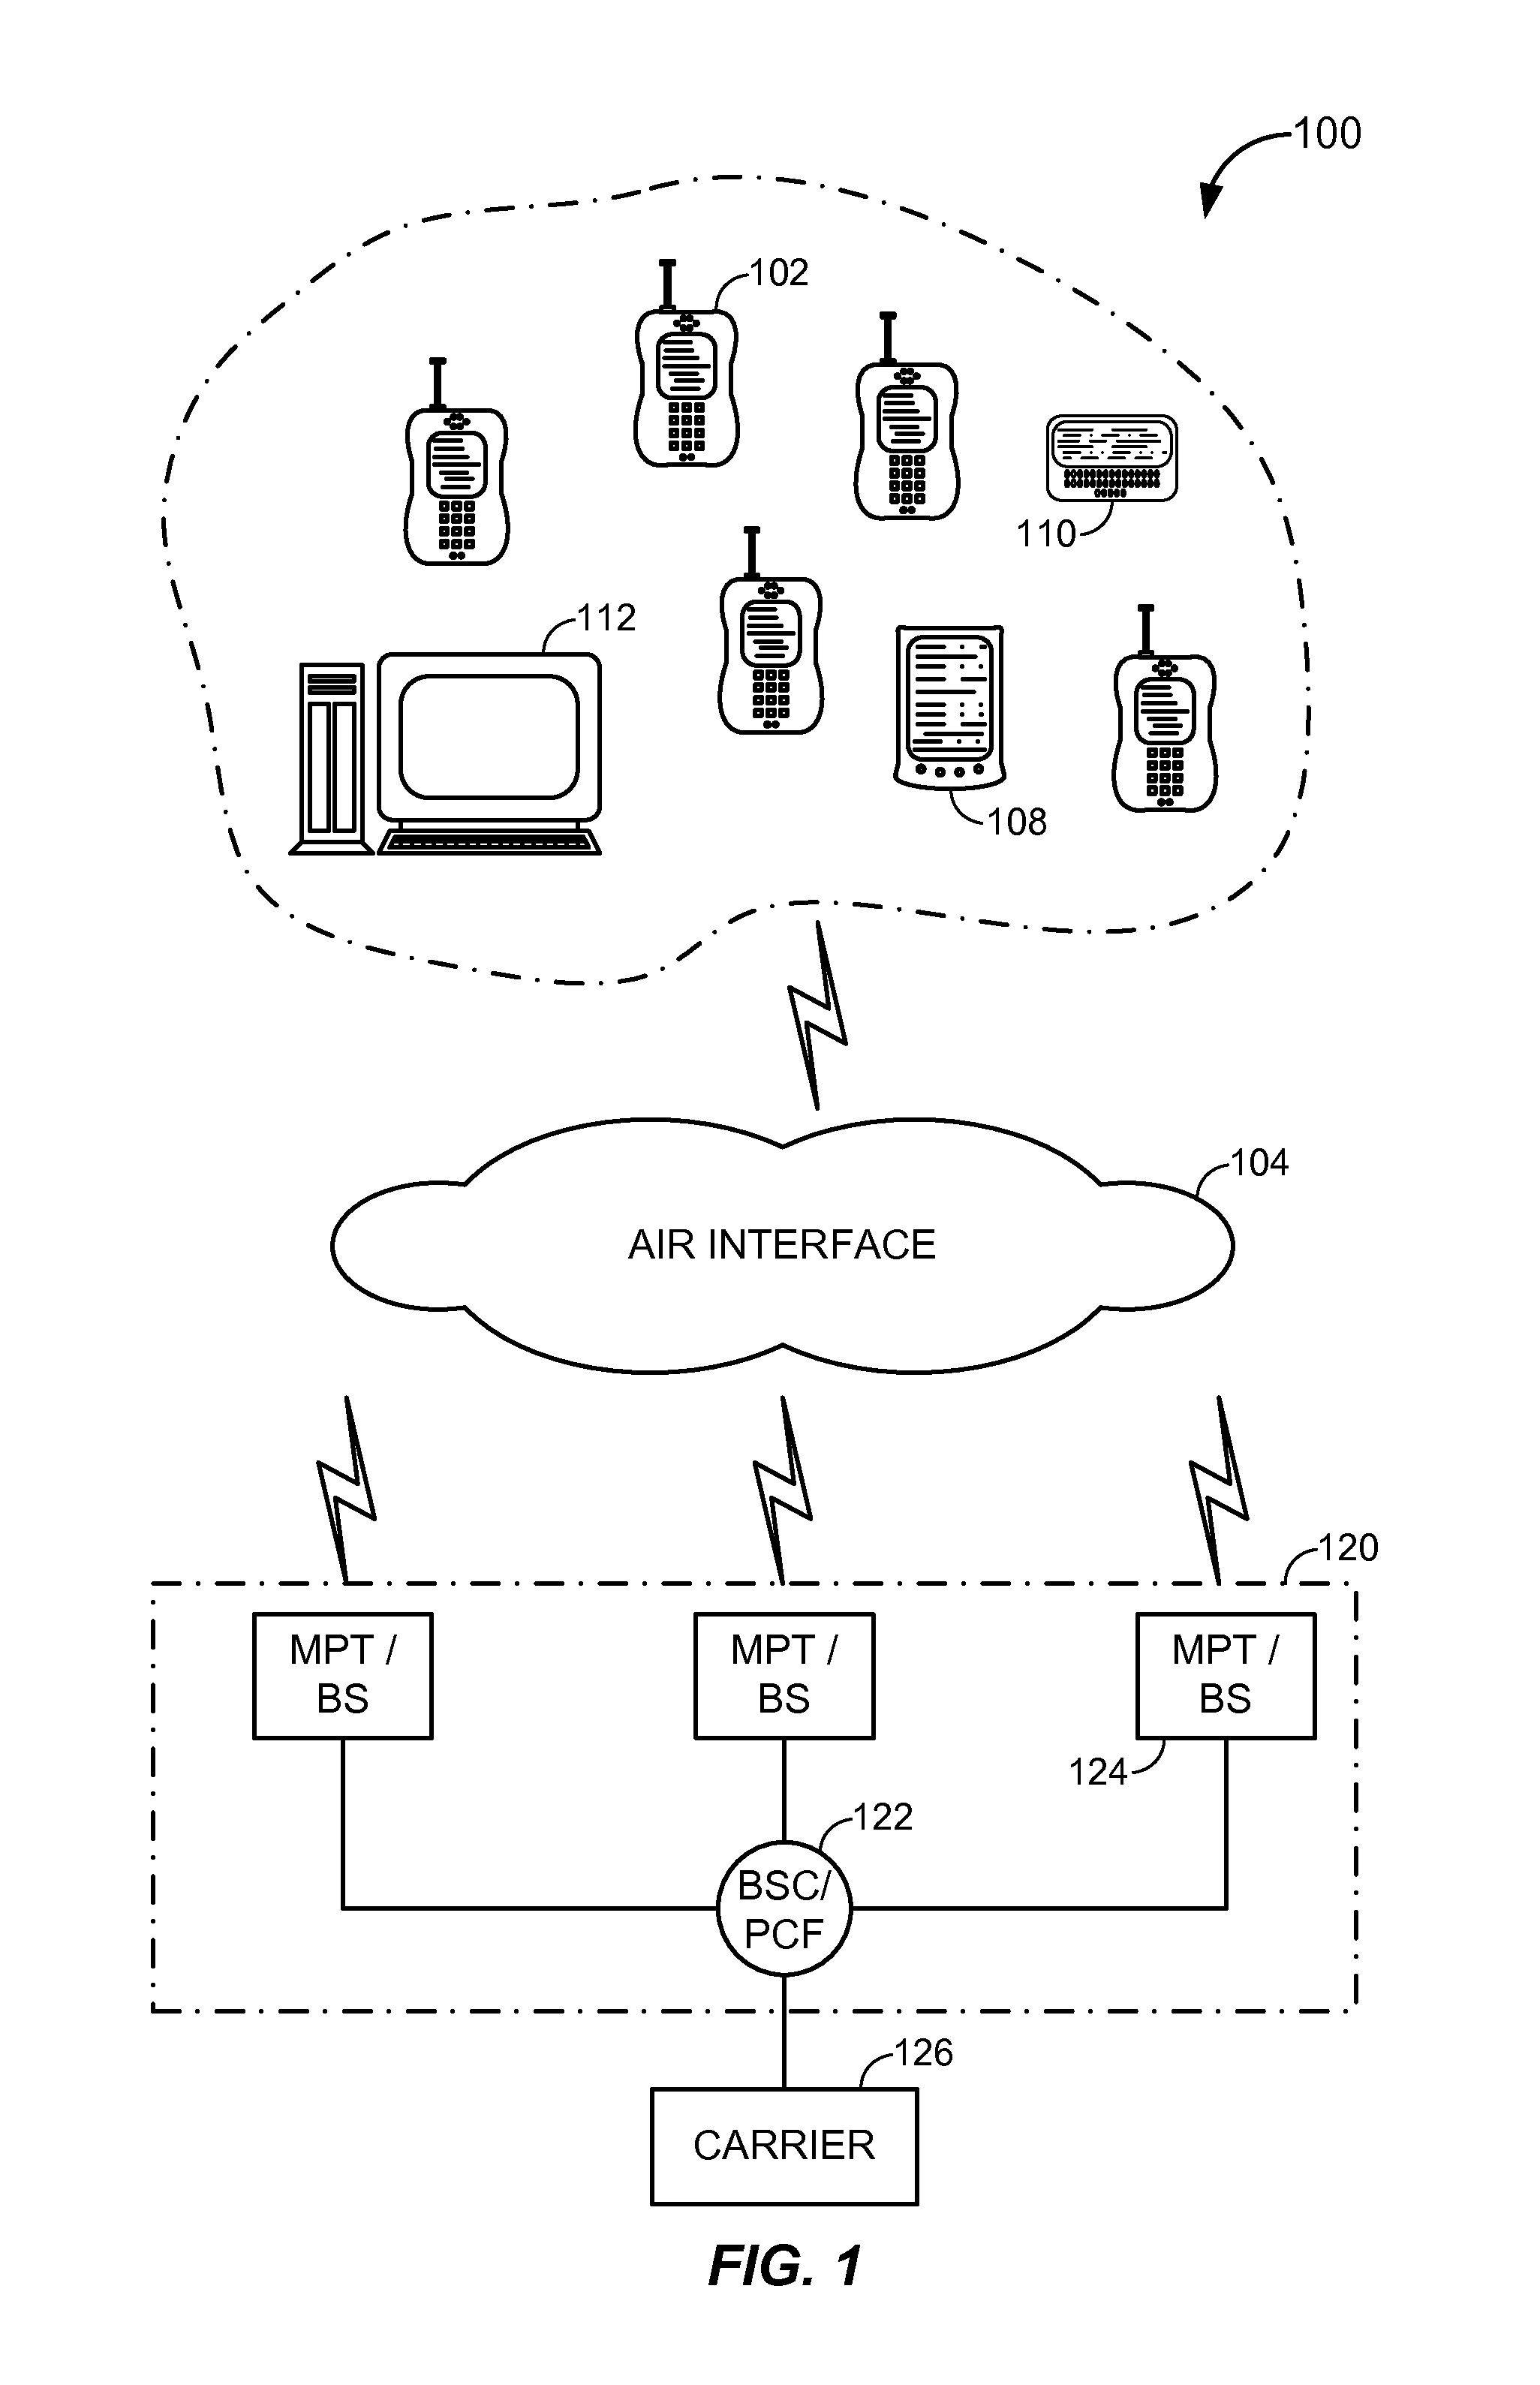 Group communication sessions in a wireless communication system